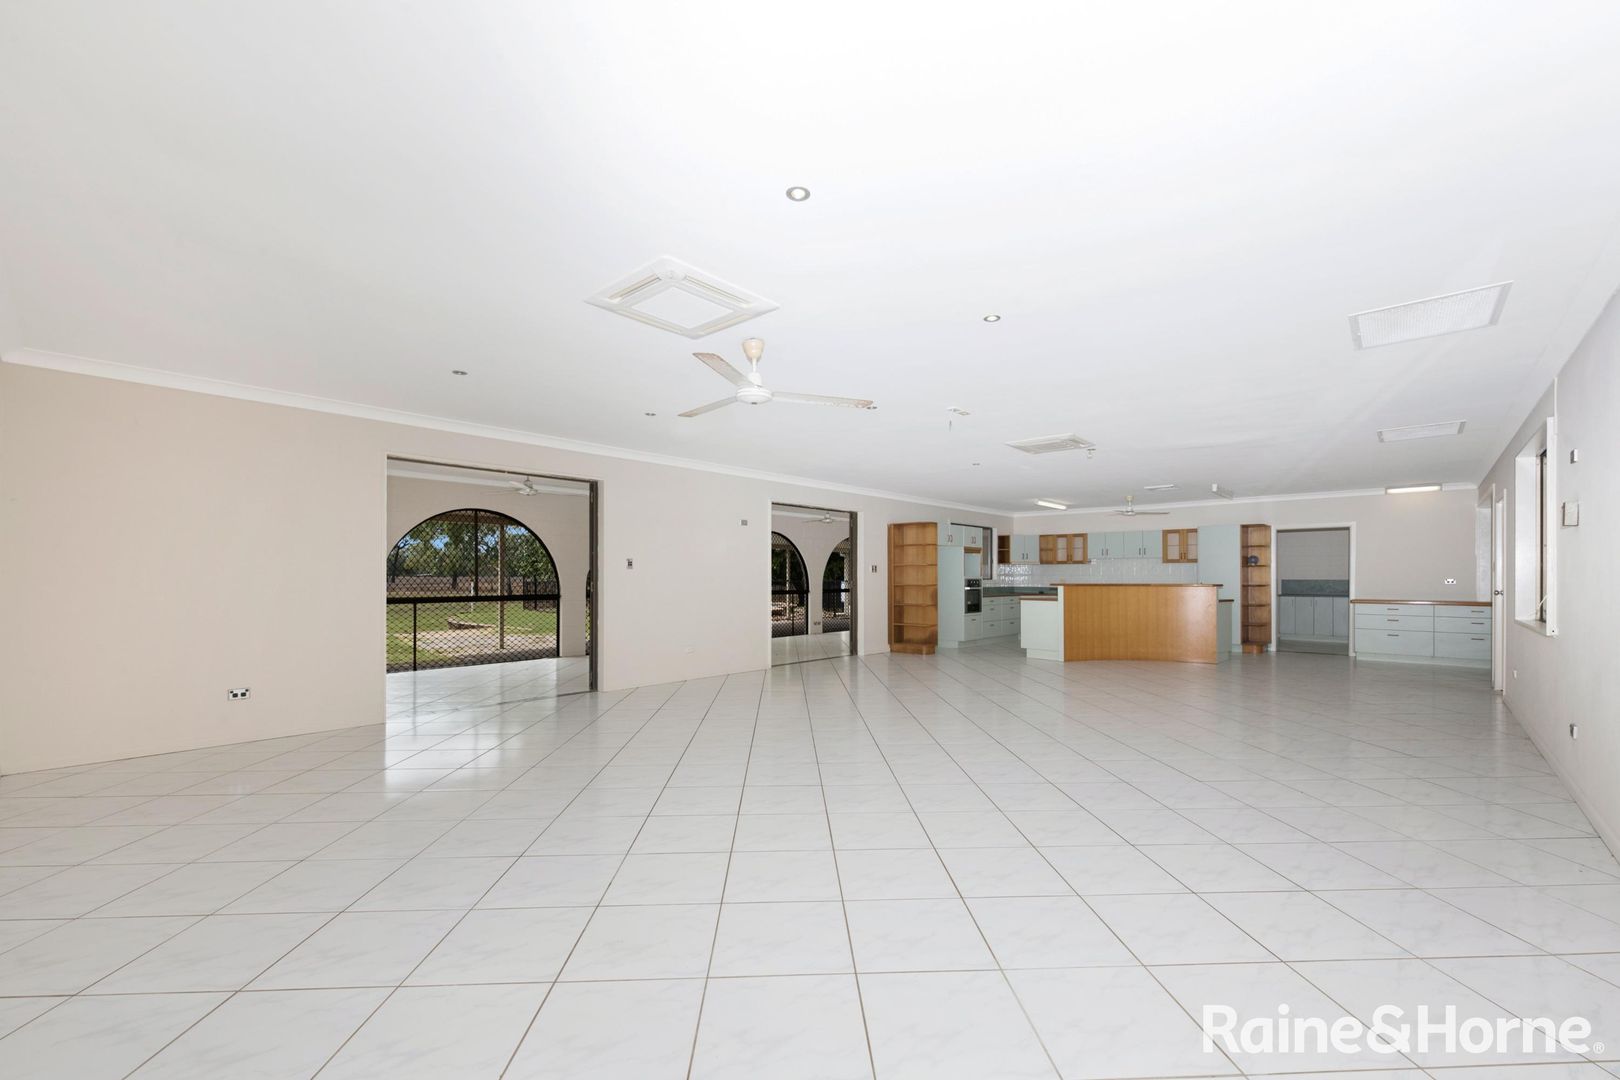 350 - 354 Bluewater Drive, Bluewater QLD 4818, Image 1